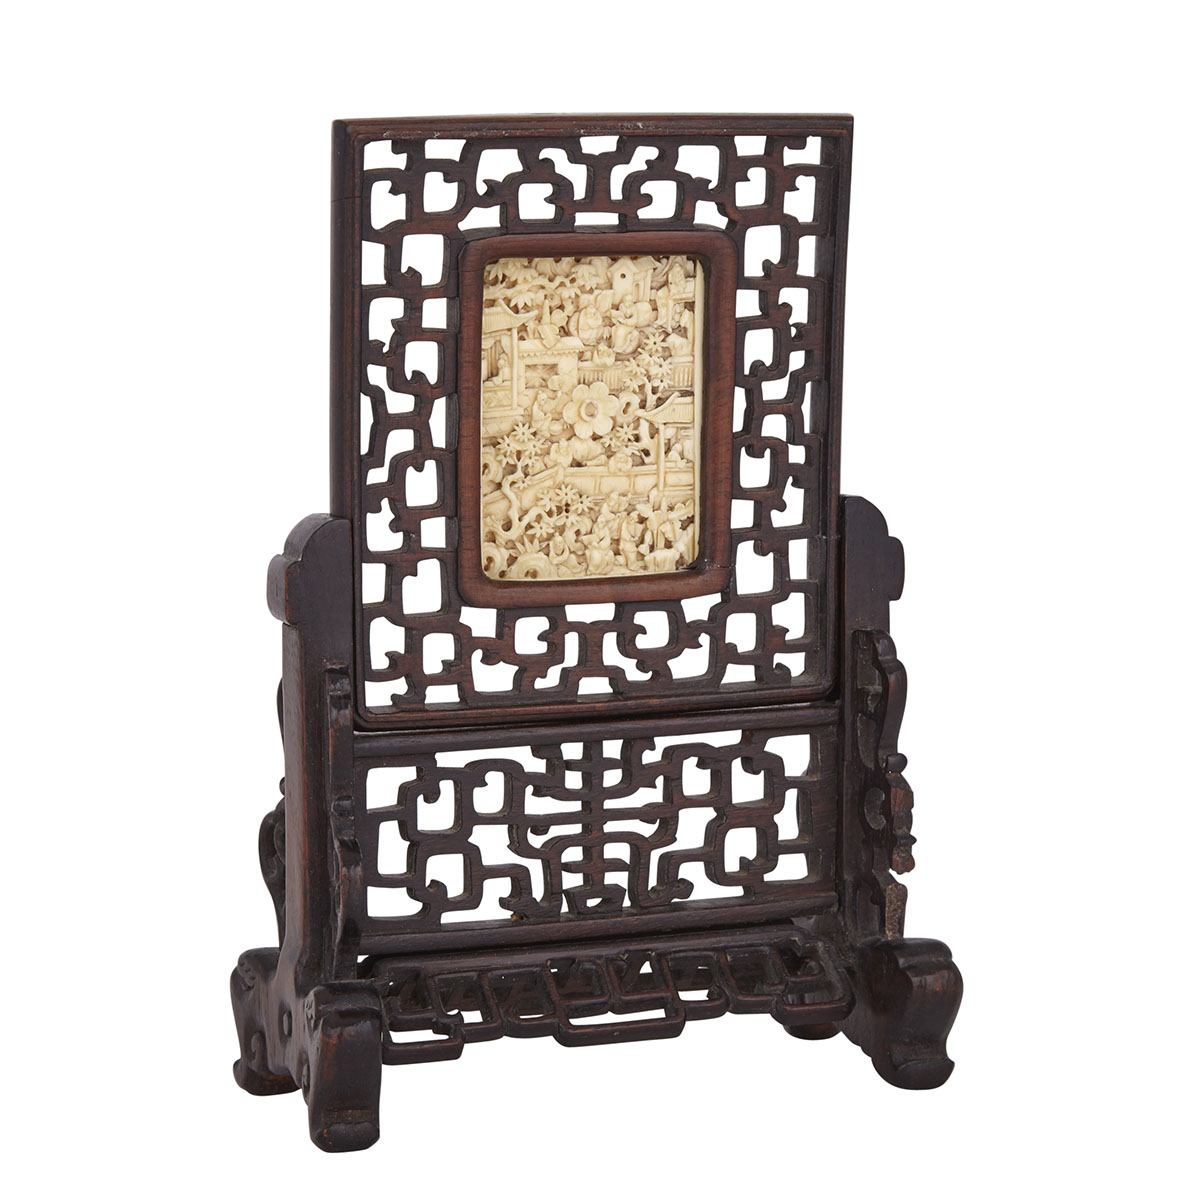 A Finely Carved Ivory and Rosewood Table Screen, Qing Dynasty, 19th Century